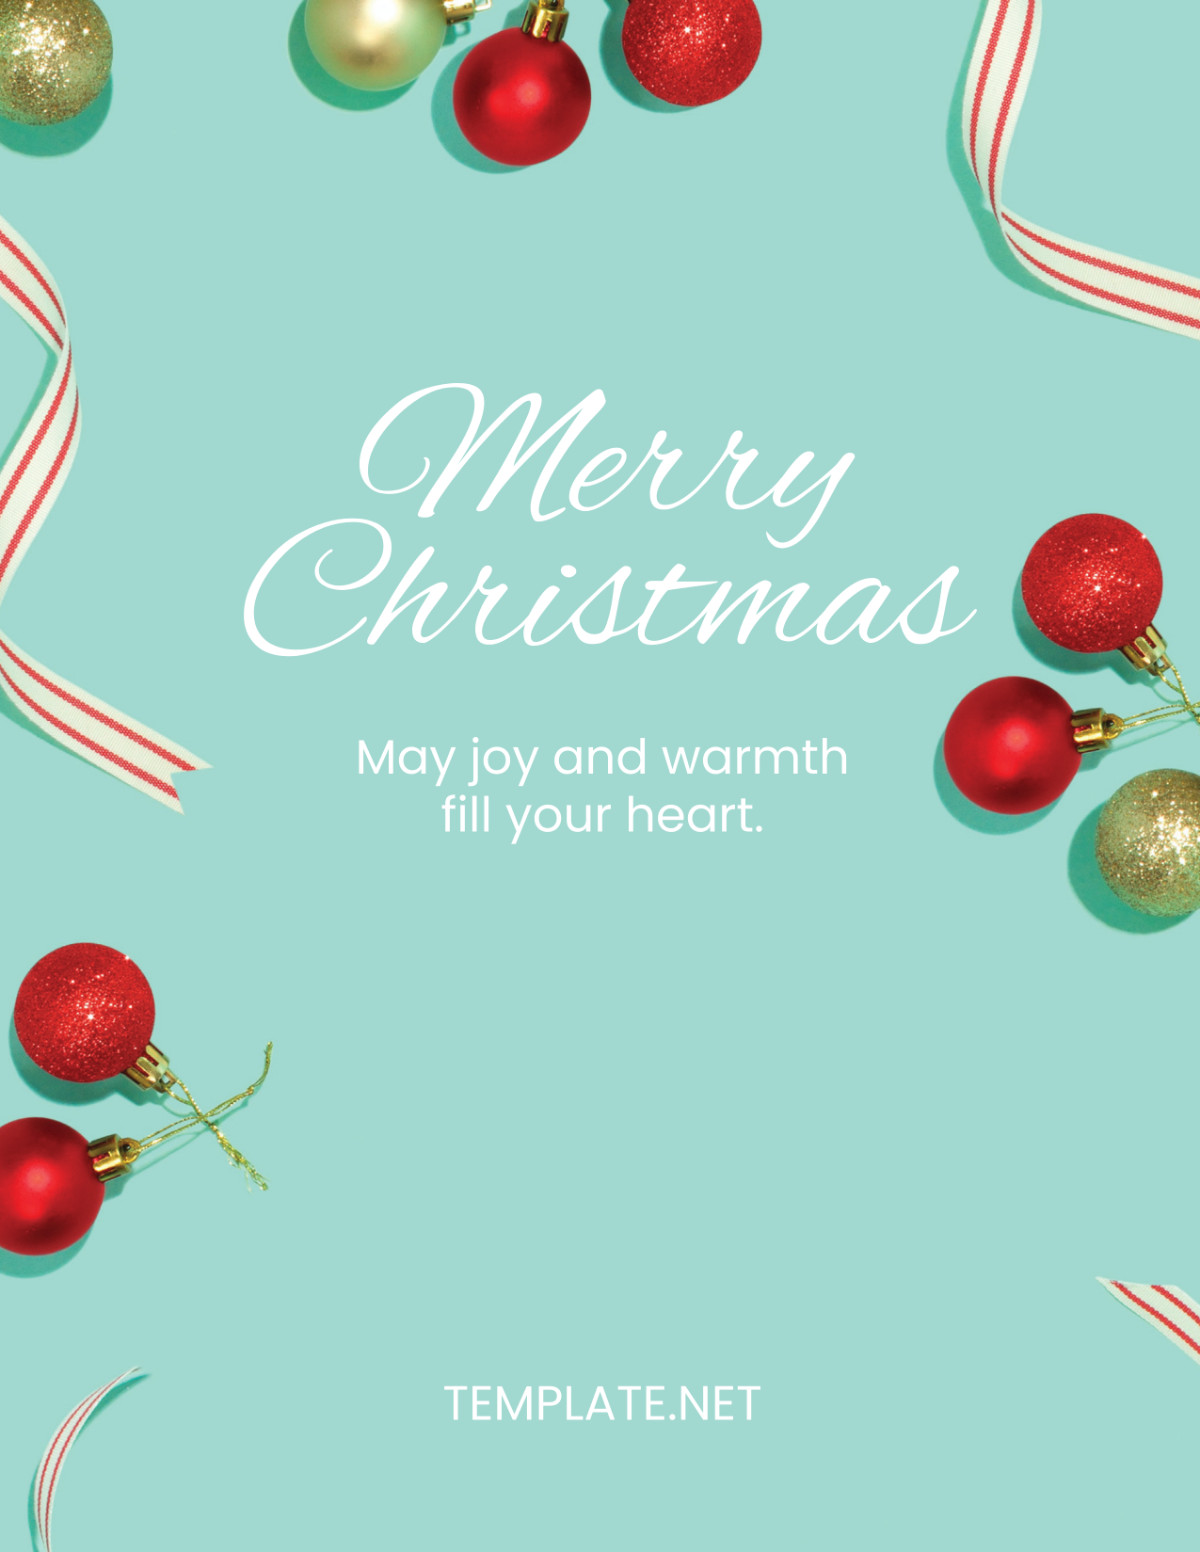 Merry Christmas Wishes Flyer edit online